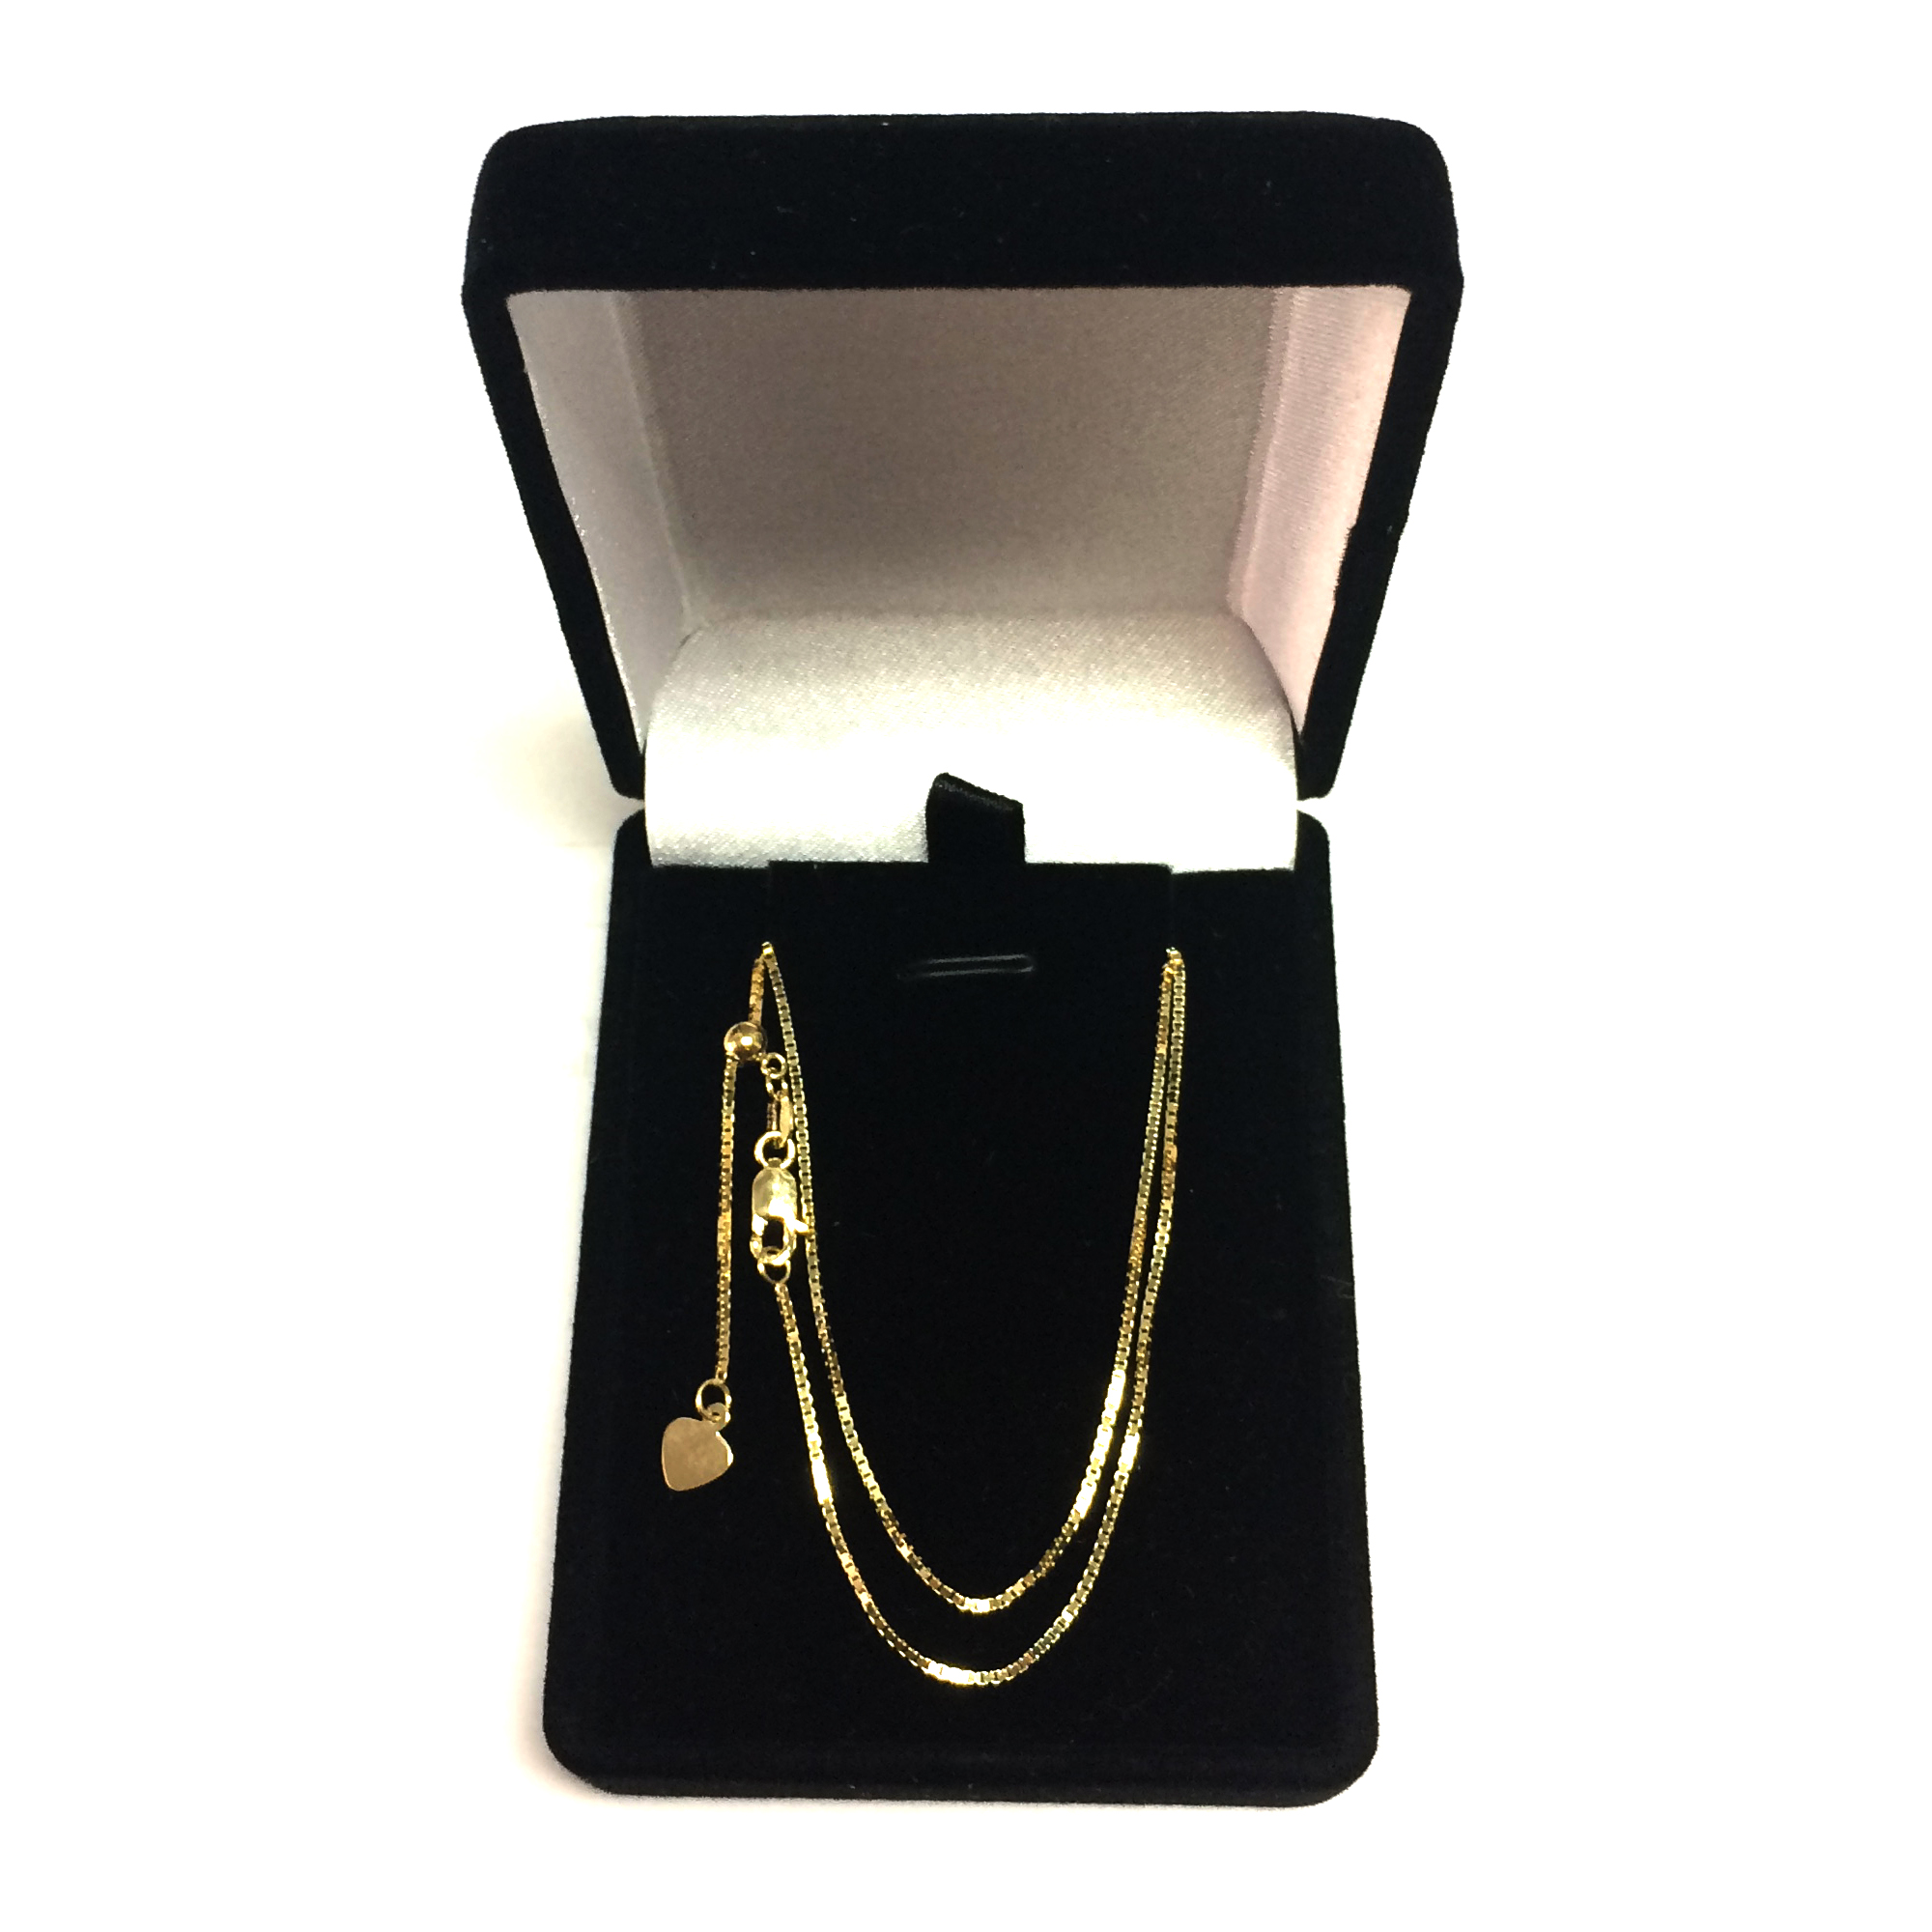 Jewelry Affairs 10k Yellow Gold Adjustable Box Link Chain Necklace, 0.85mm, 22"